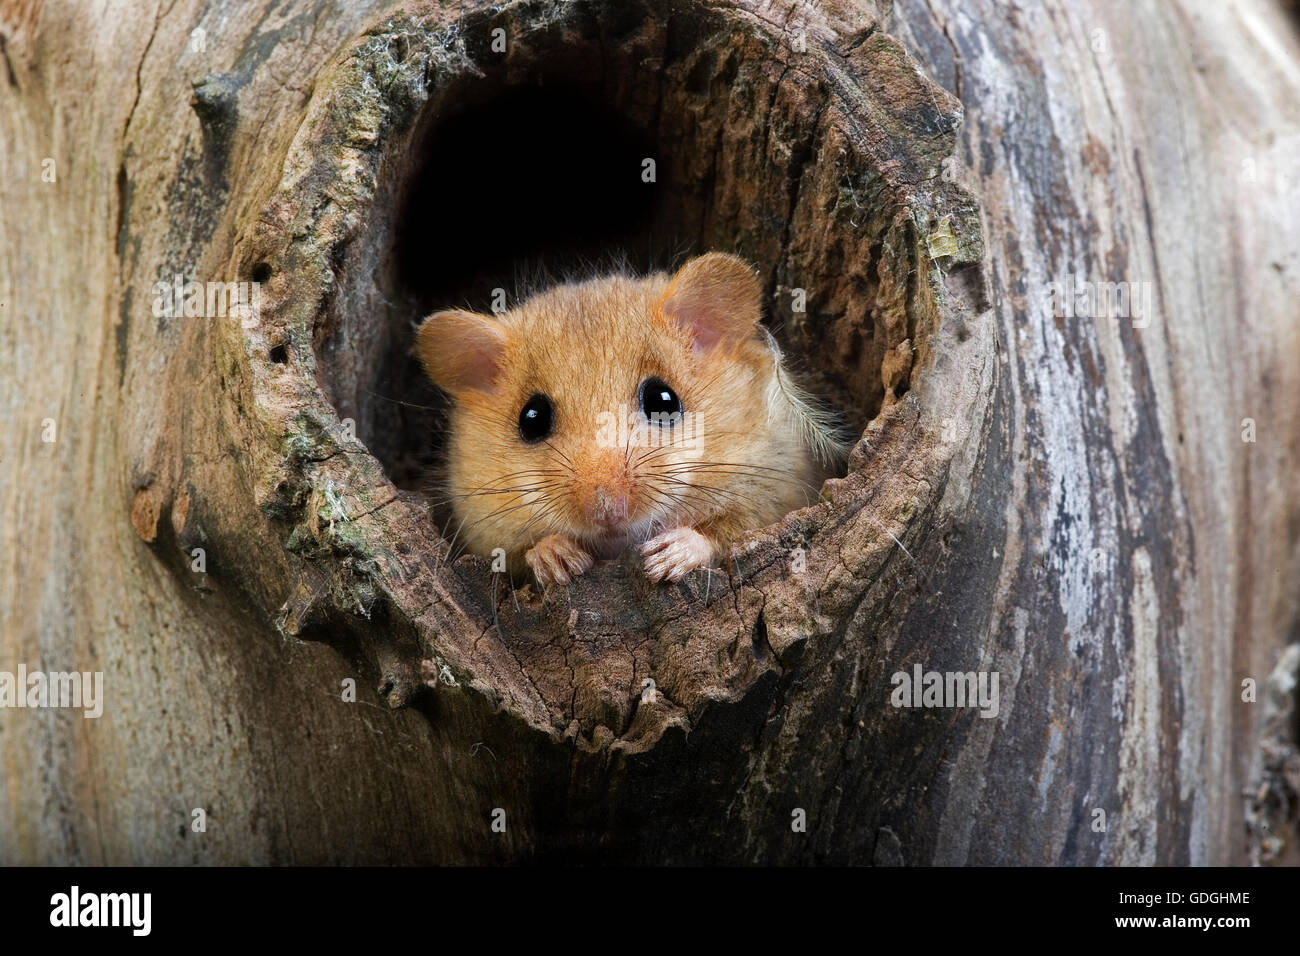 COMMON DORMOUSE muscardinus avellanarius, ADULT AT NEST ENTRANCE, NORMANDY IN FRANCE Stock Photo